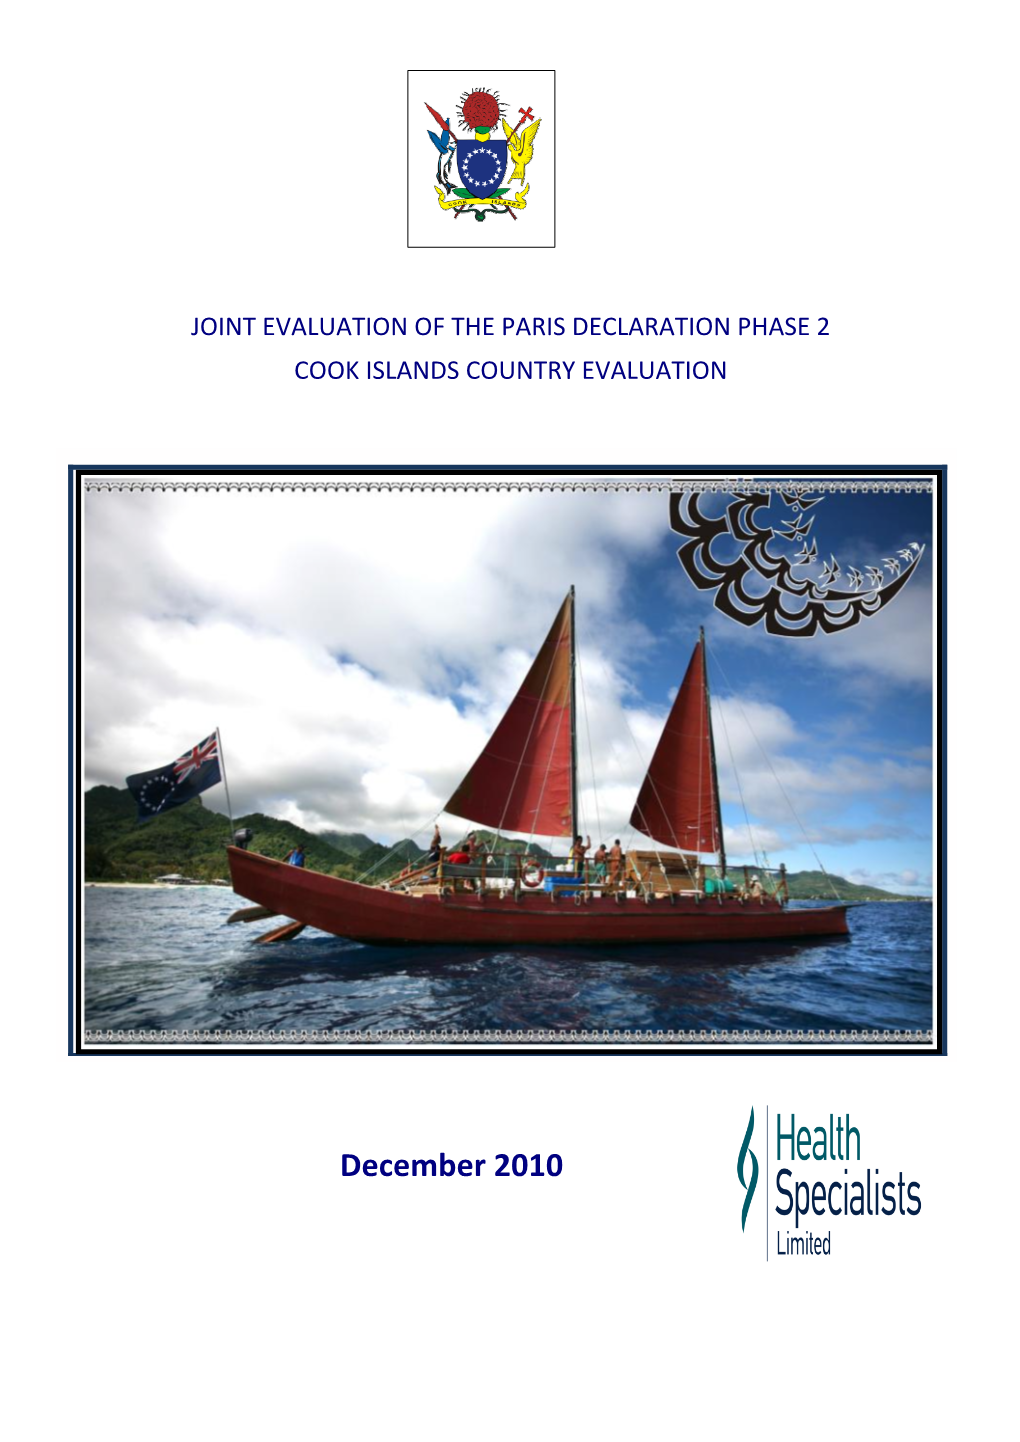 Cook Islands Country Evaluation